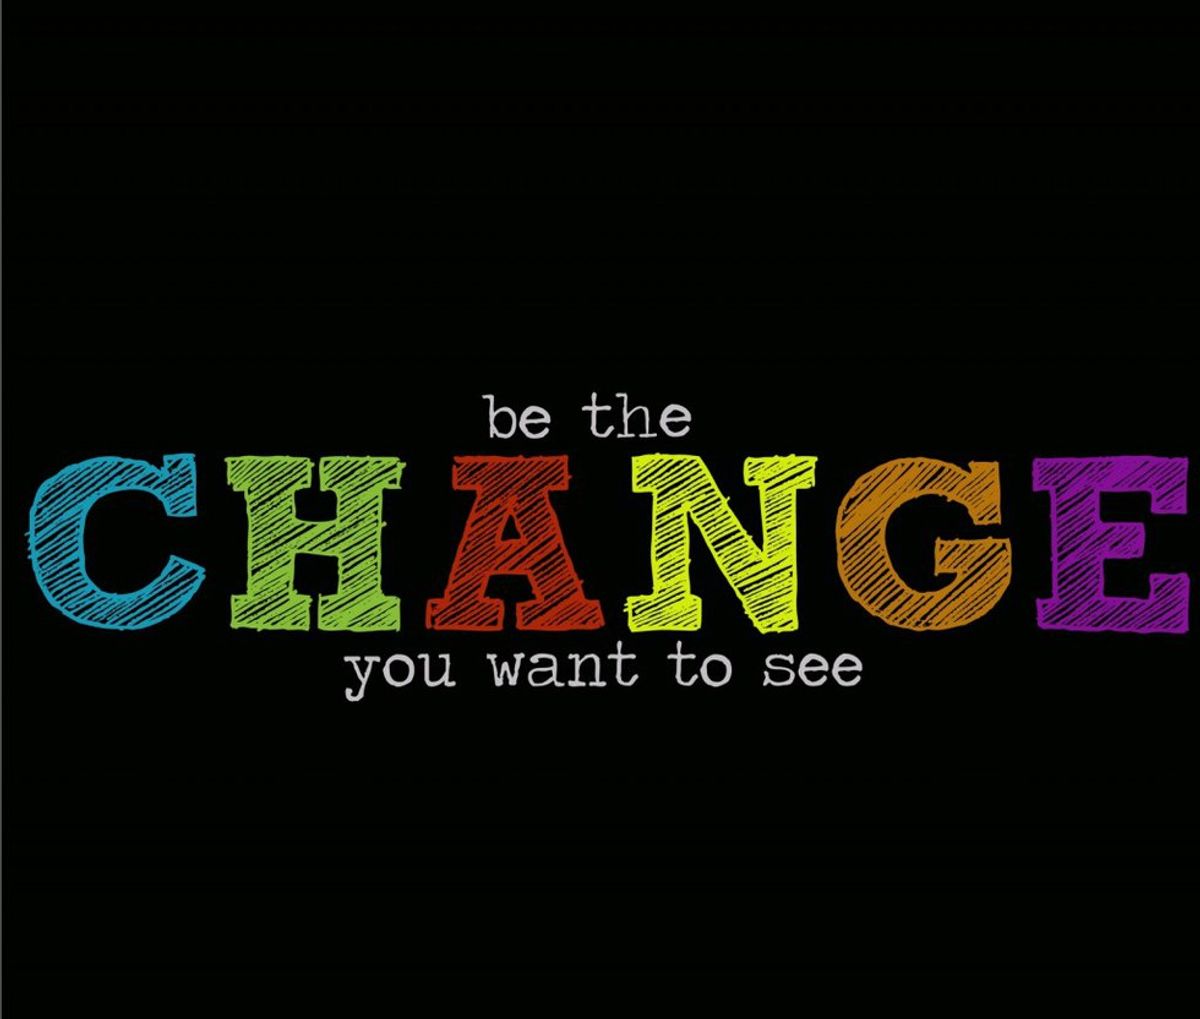 Are You Ready To Be The Change?